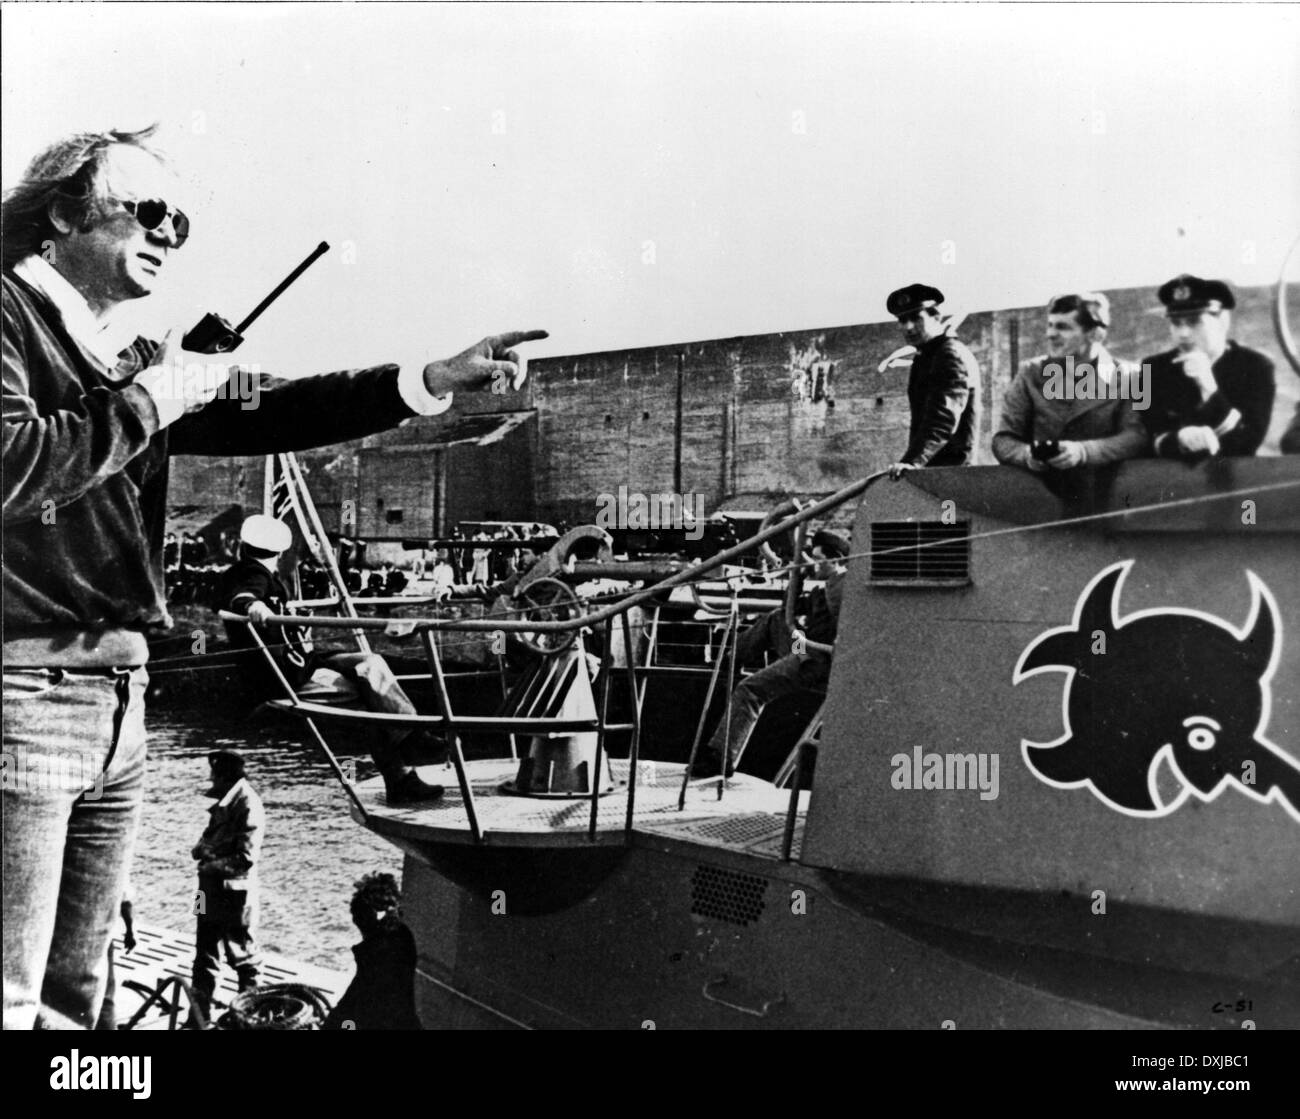 Das boot 1981 Black and White Stock Photos & Images - Alamy